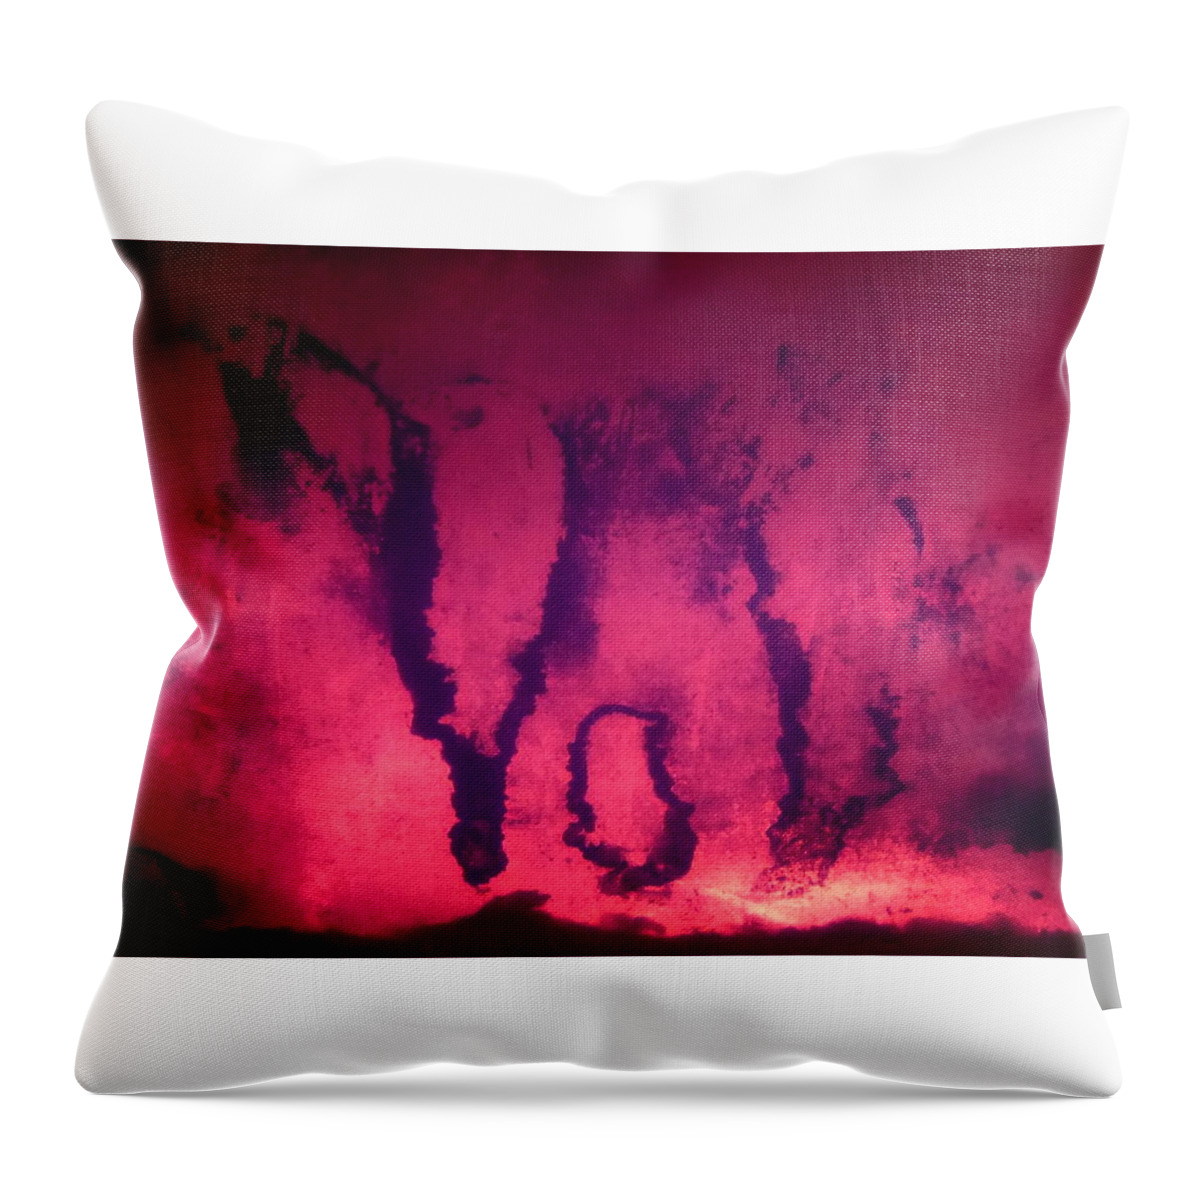 Fire Throw Pillow featuring the photograph Hell Wants You by Guy Pettingell